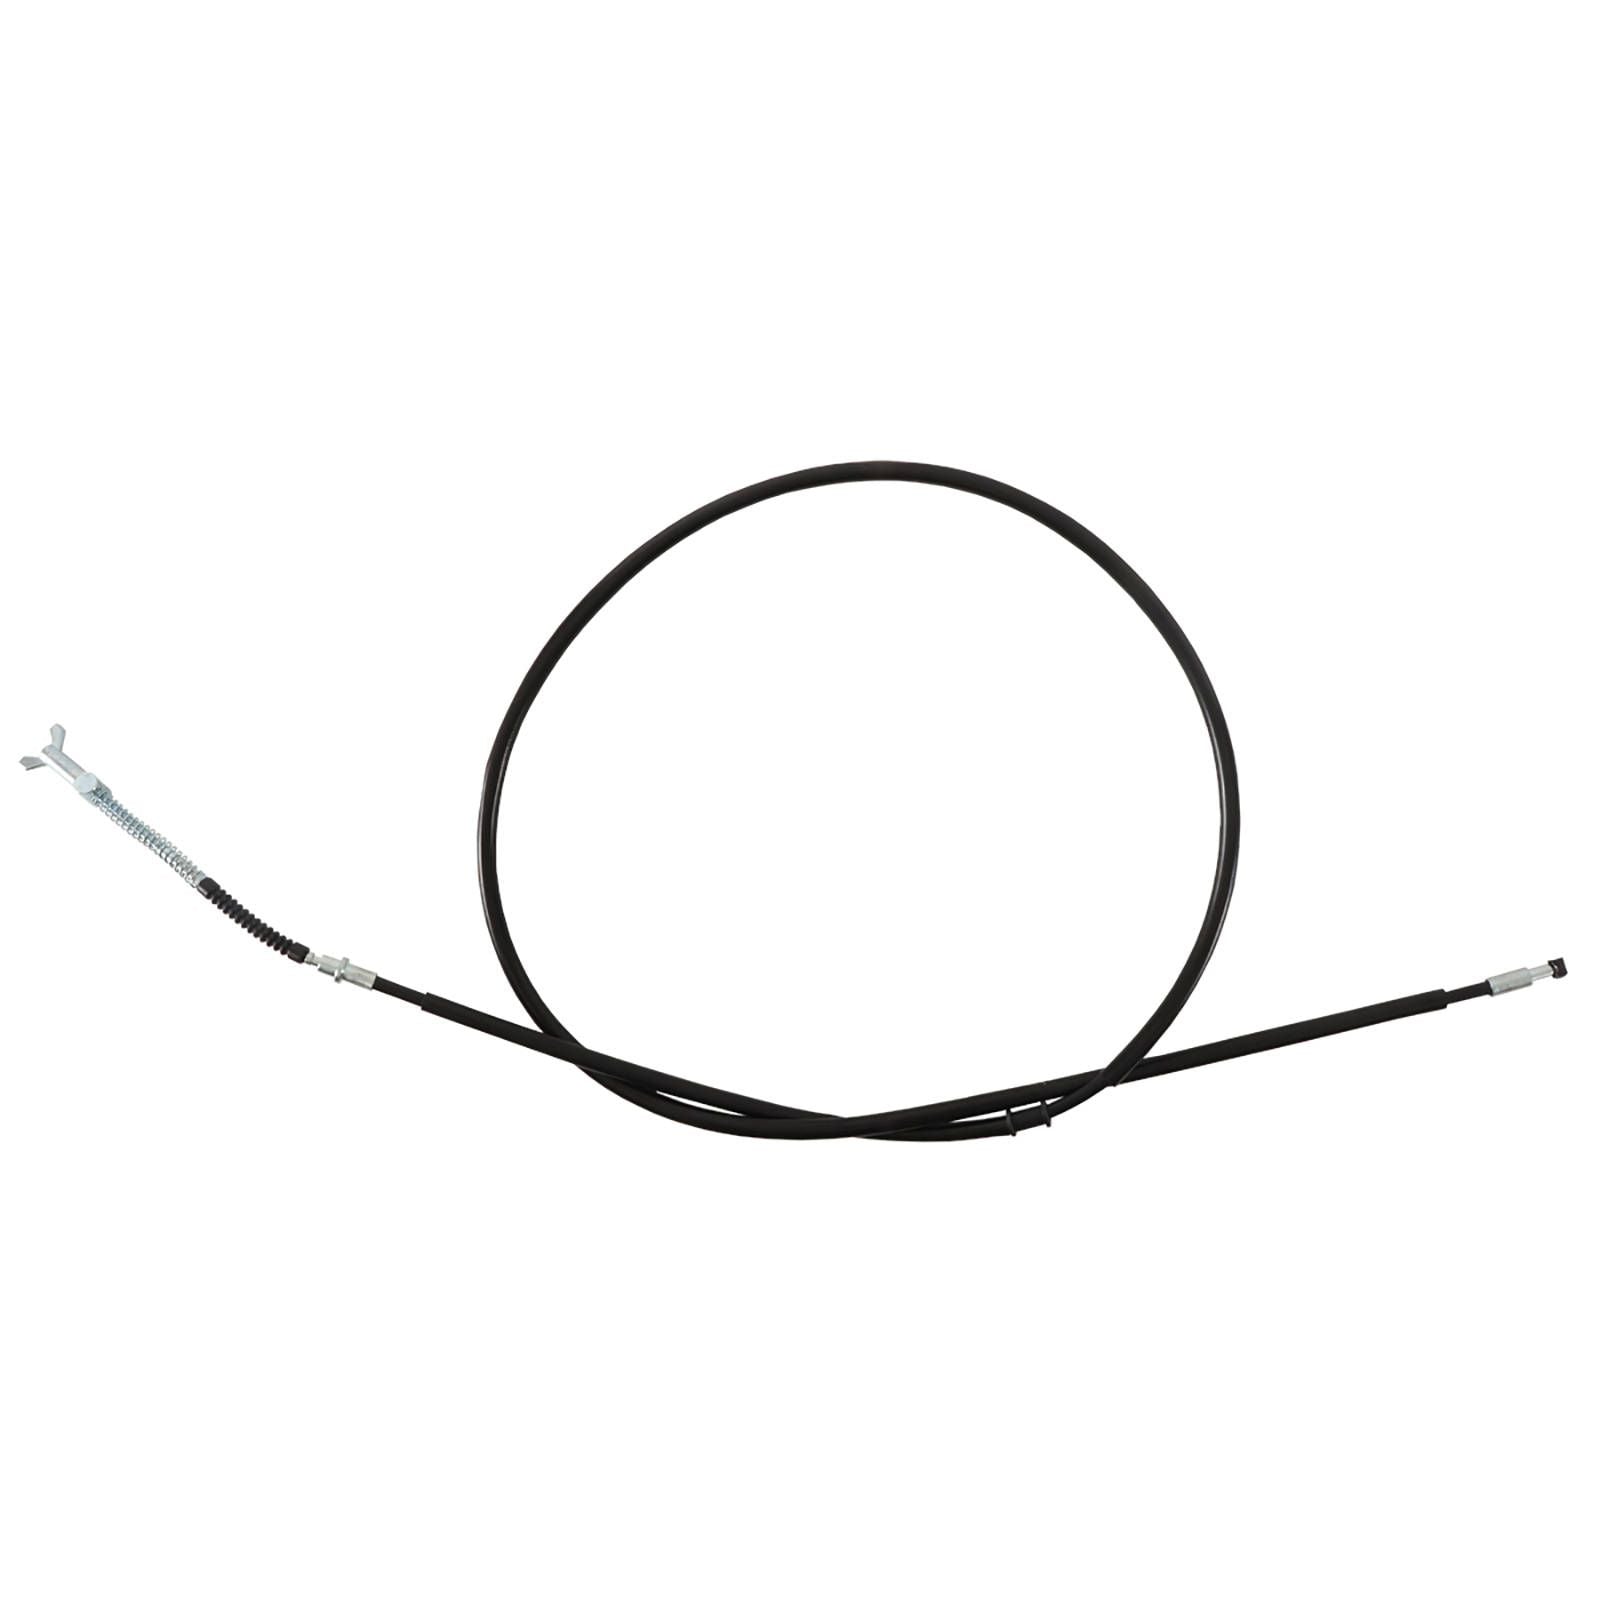 New WHITES Motorcycle Hand Brake Cable - Rear #WPCC01042